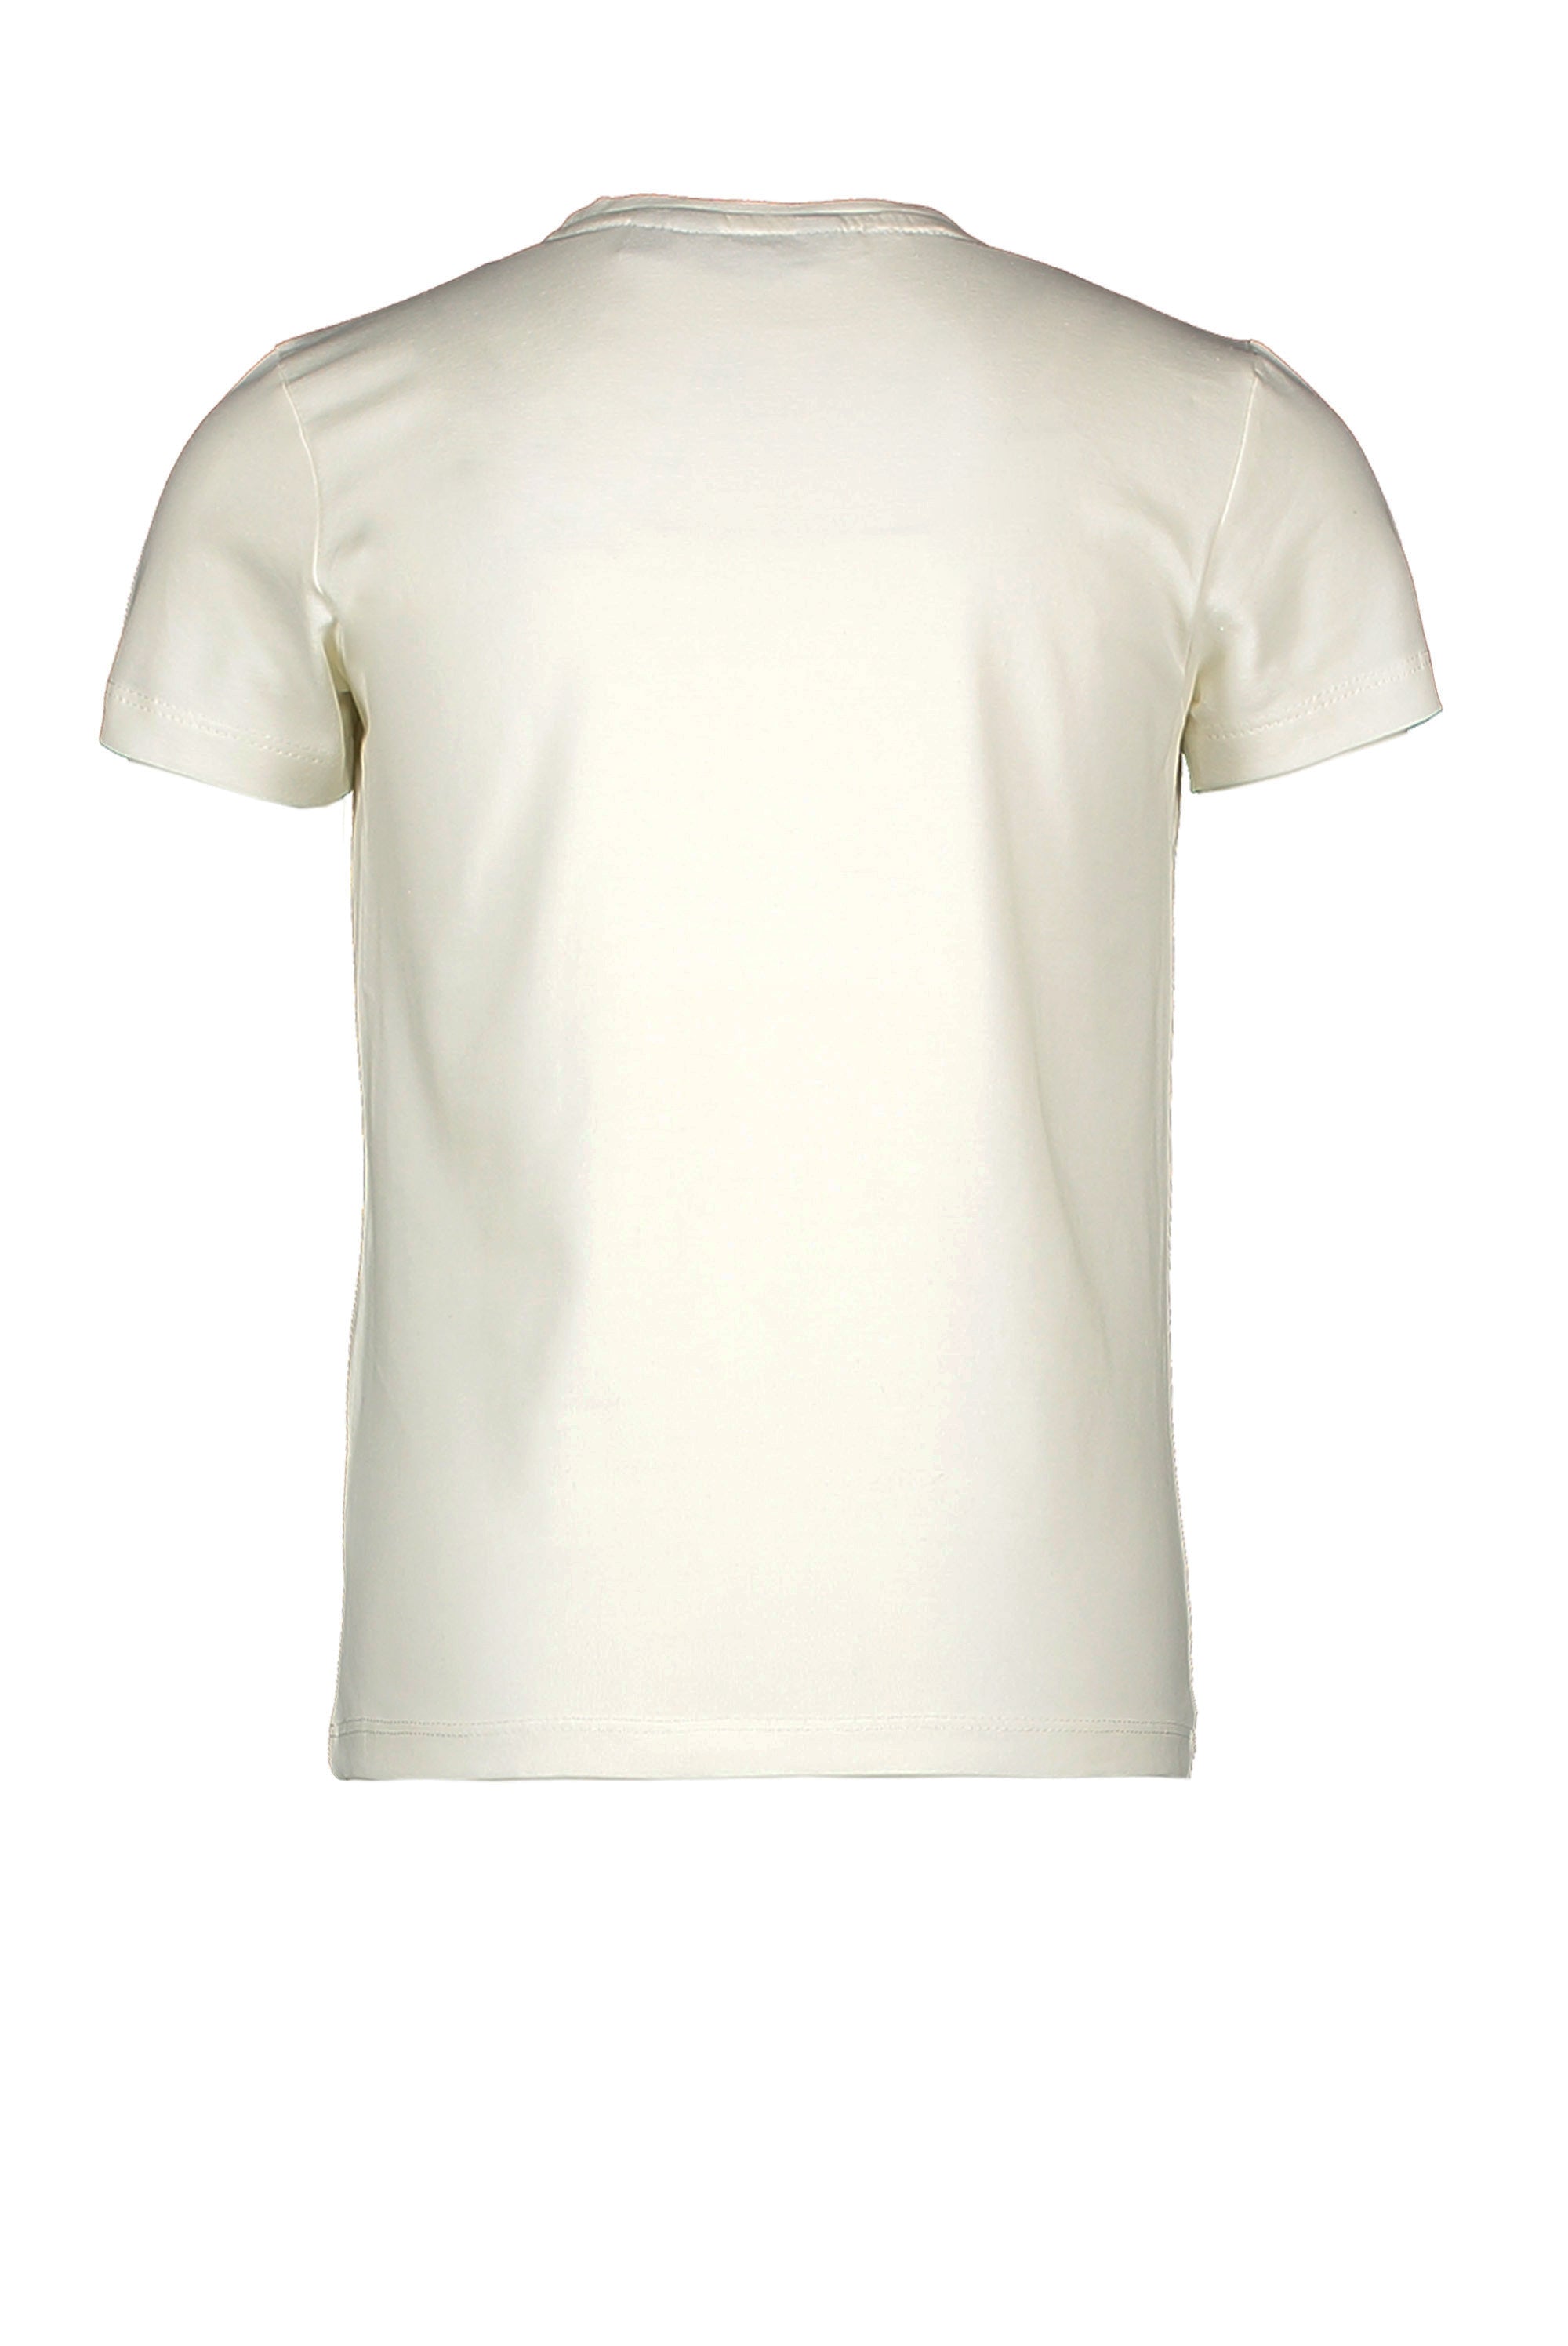 Moodstreet MT t-shirt chest embroidery